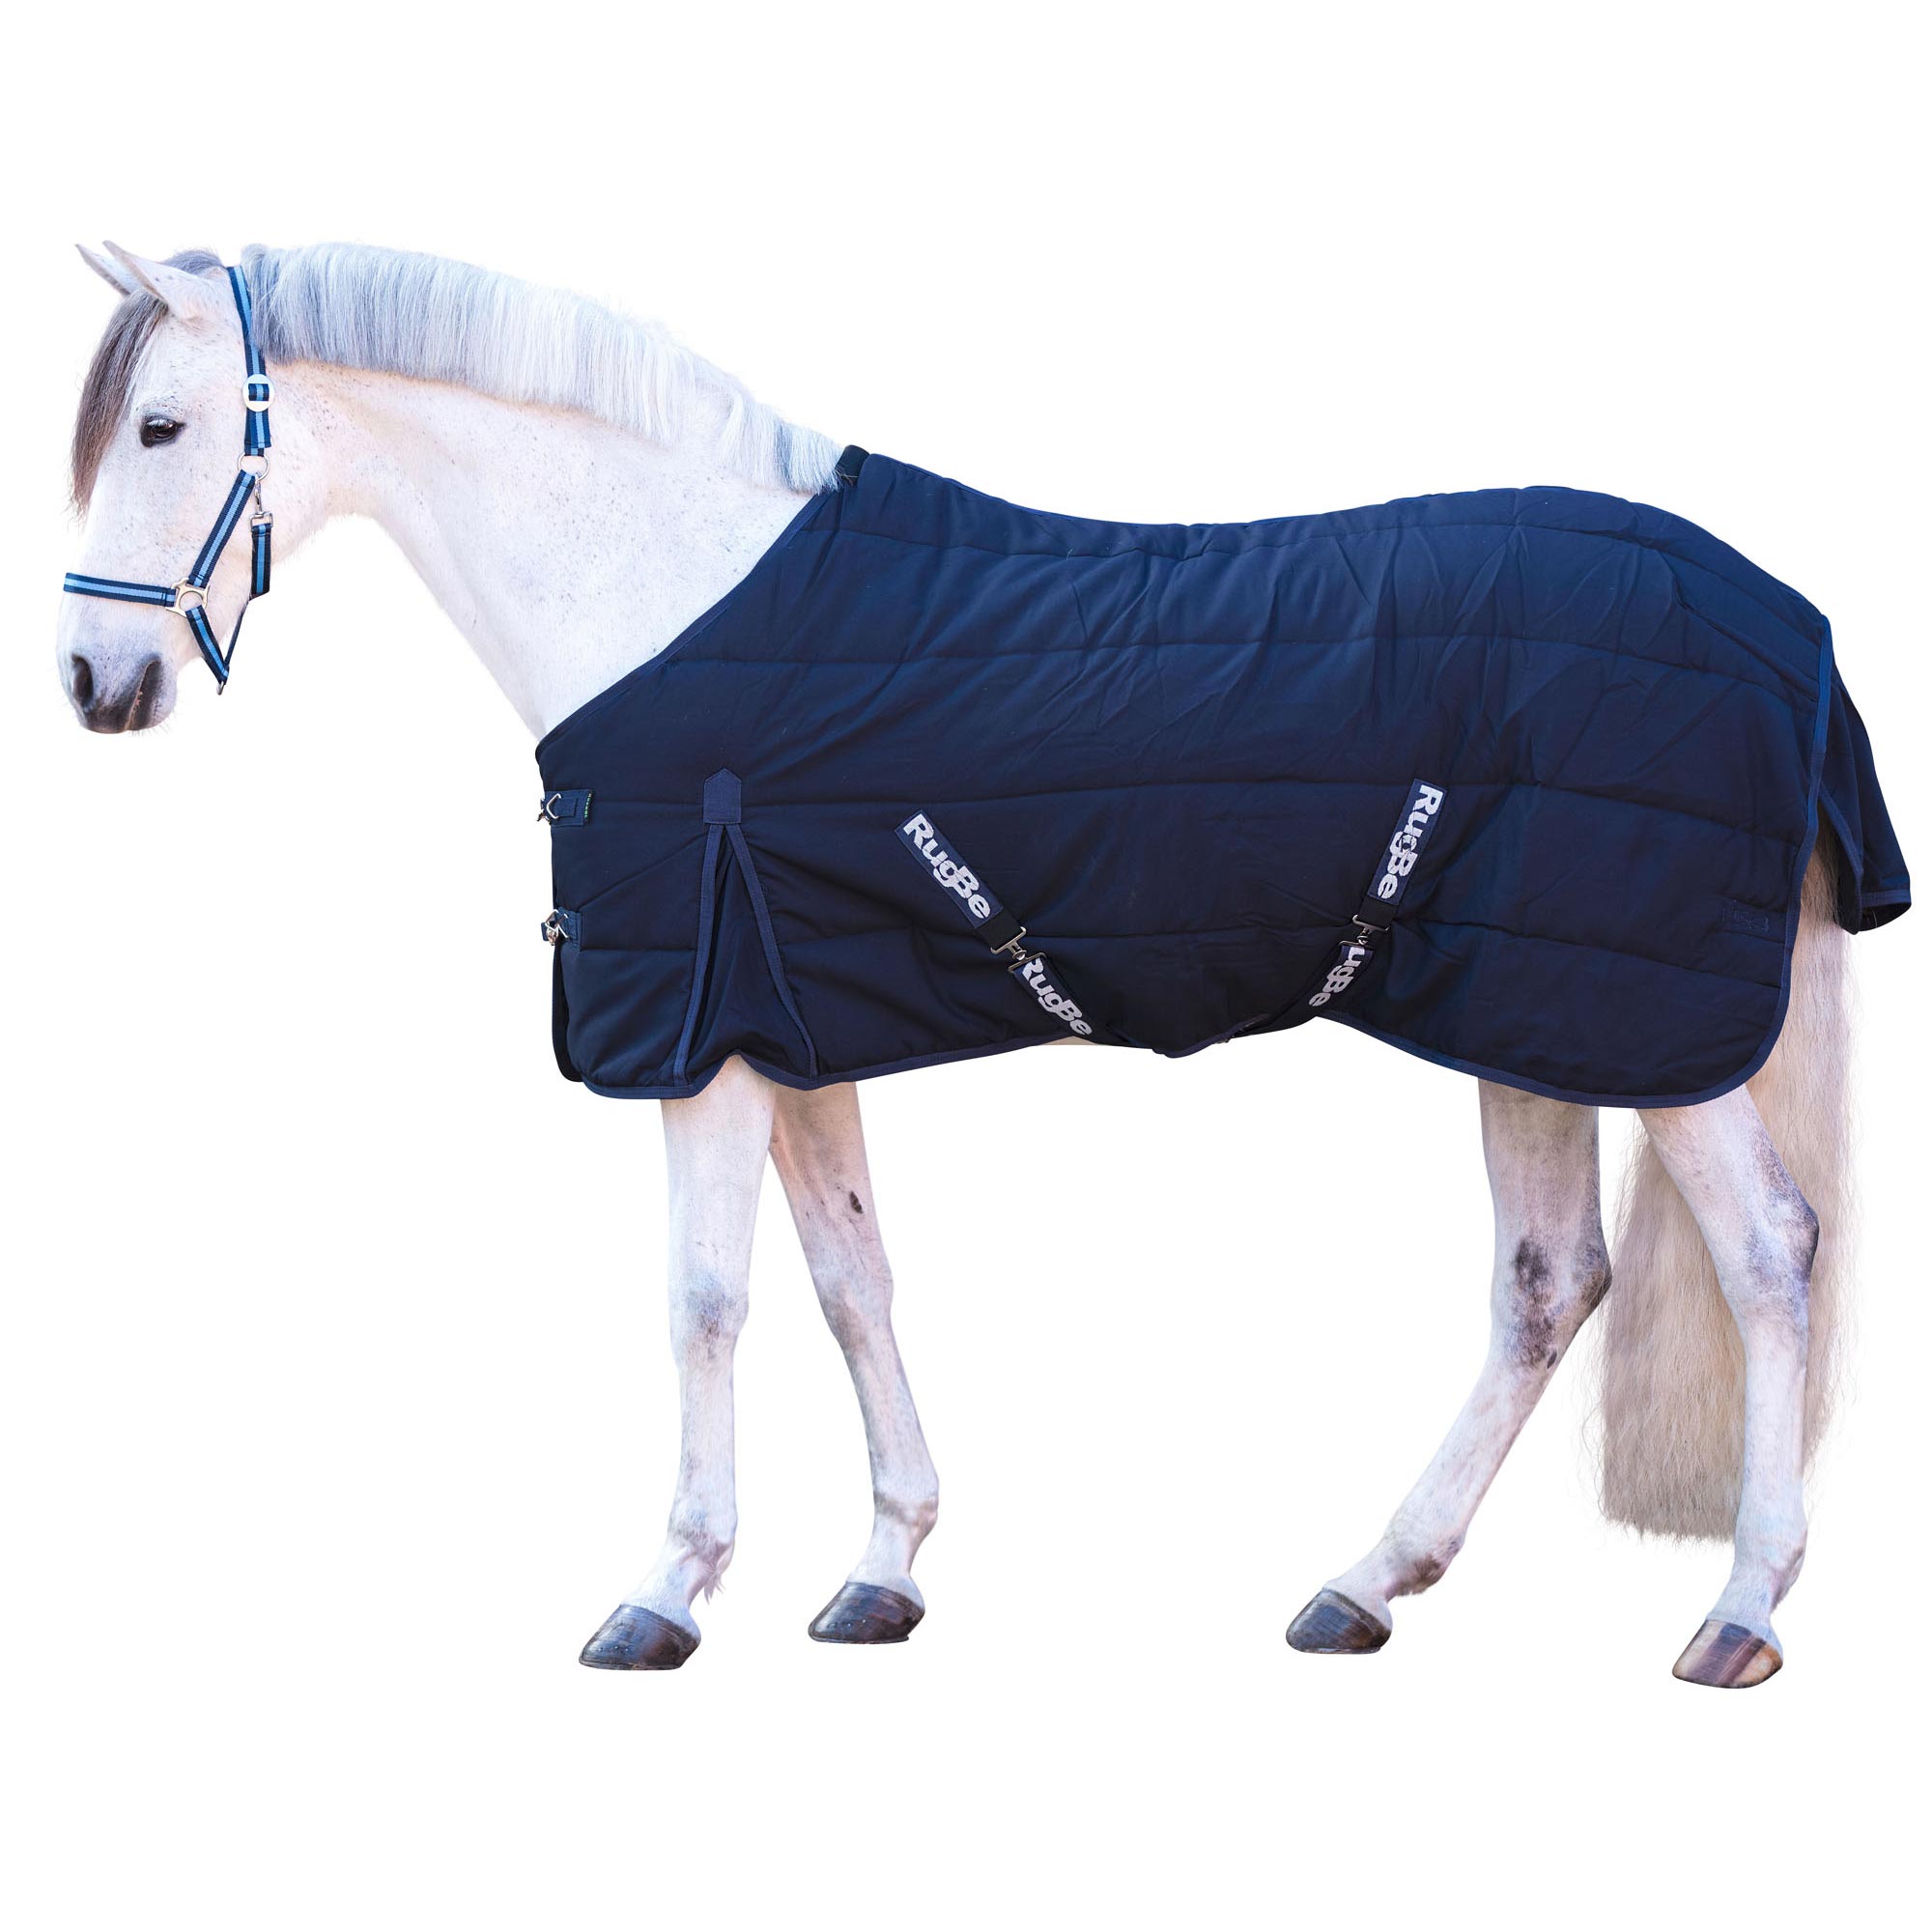 Covalliero RugBe Horse rug Indoor 300D, 150g 145